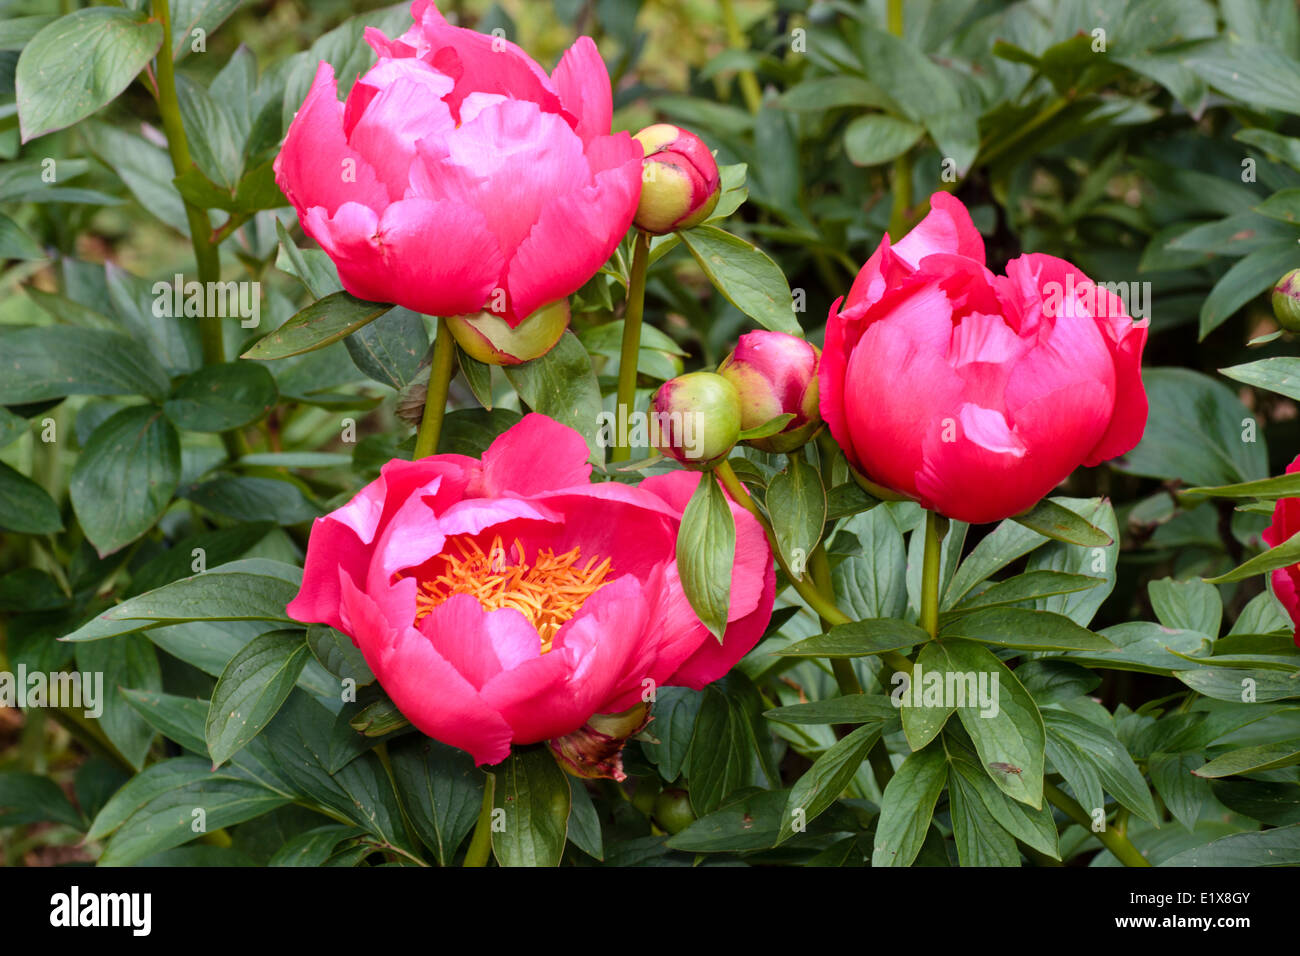 Flowers and buds of the herbaceous peony, Paeonia peregrina 'Flame' Stock Photo